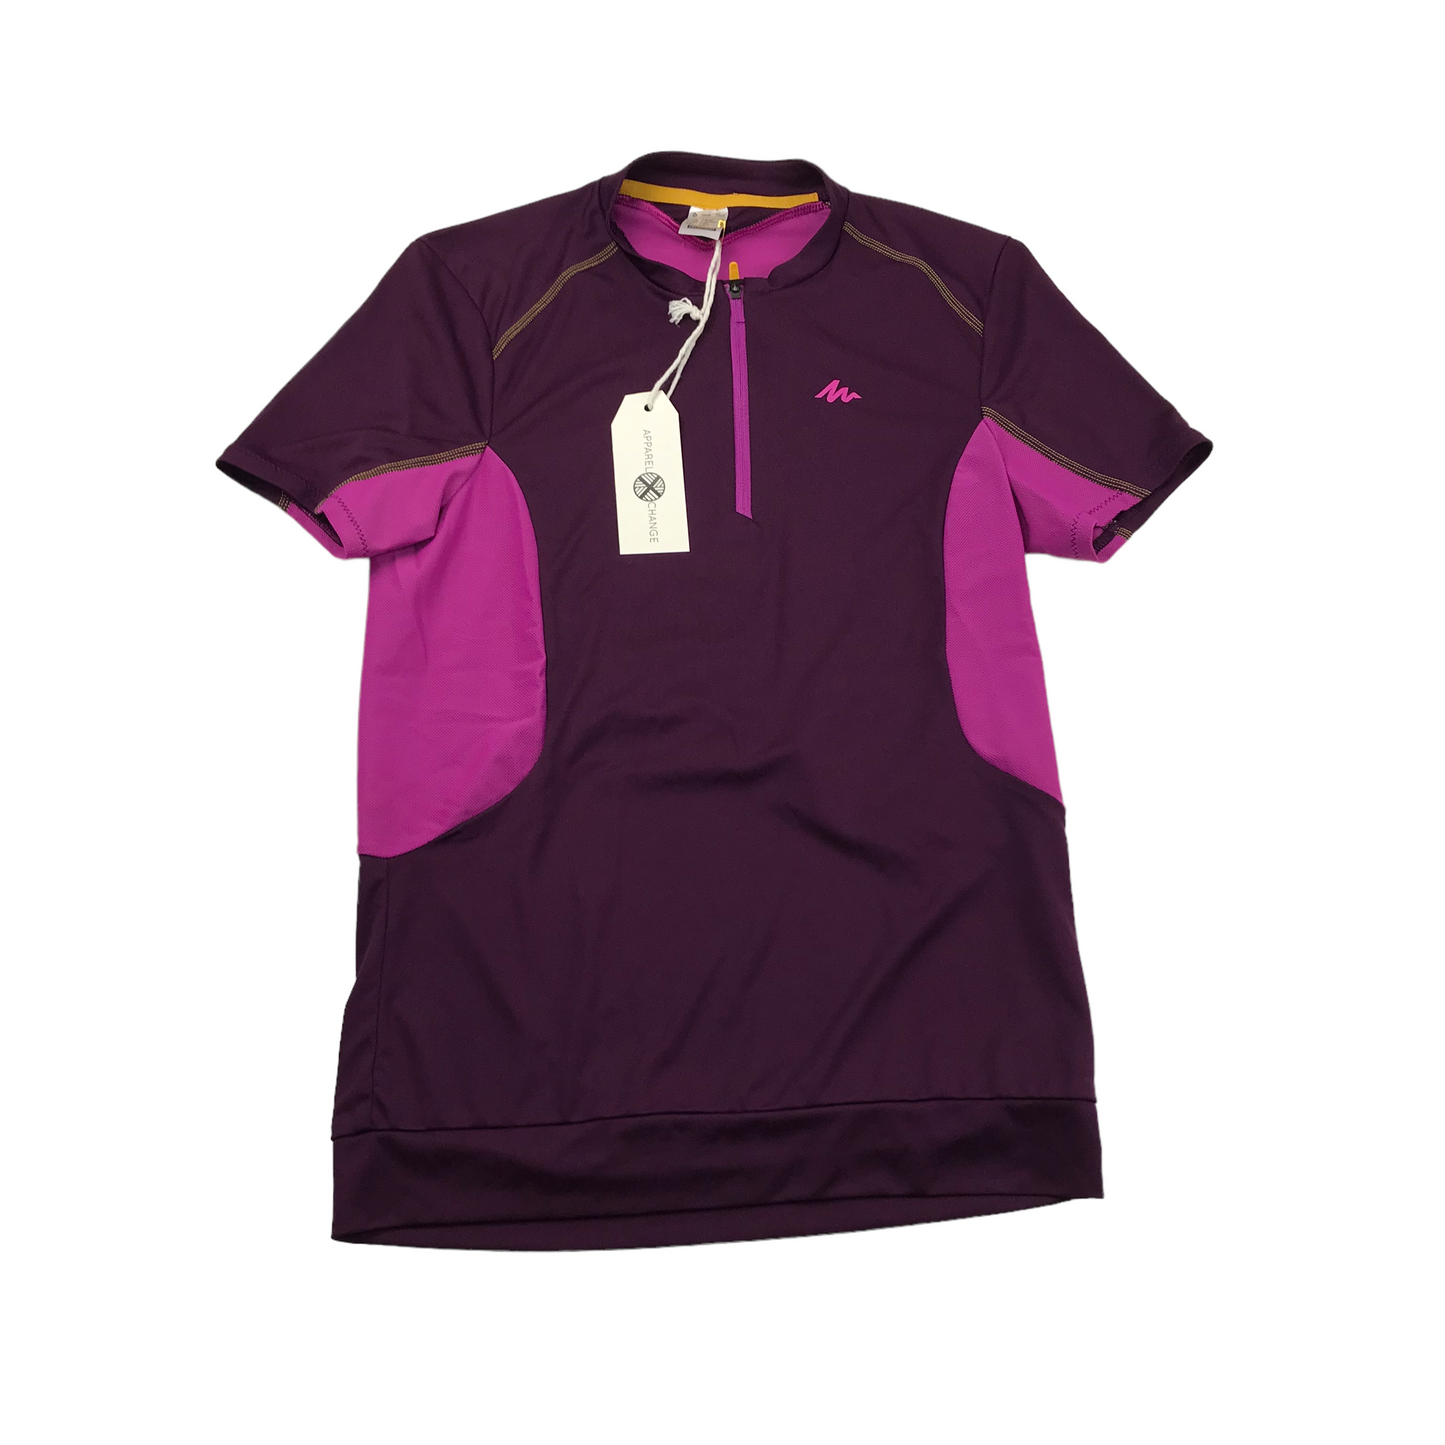 Decathlon Purple and Pink Short Sleeve Cycling Sports Top Women's Size  XS